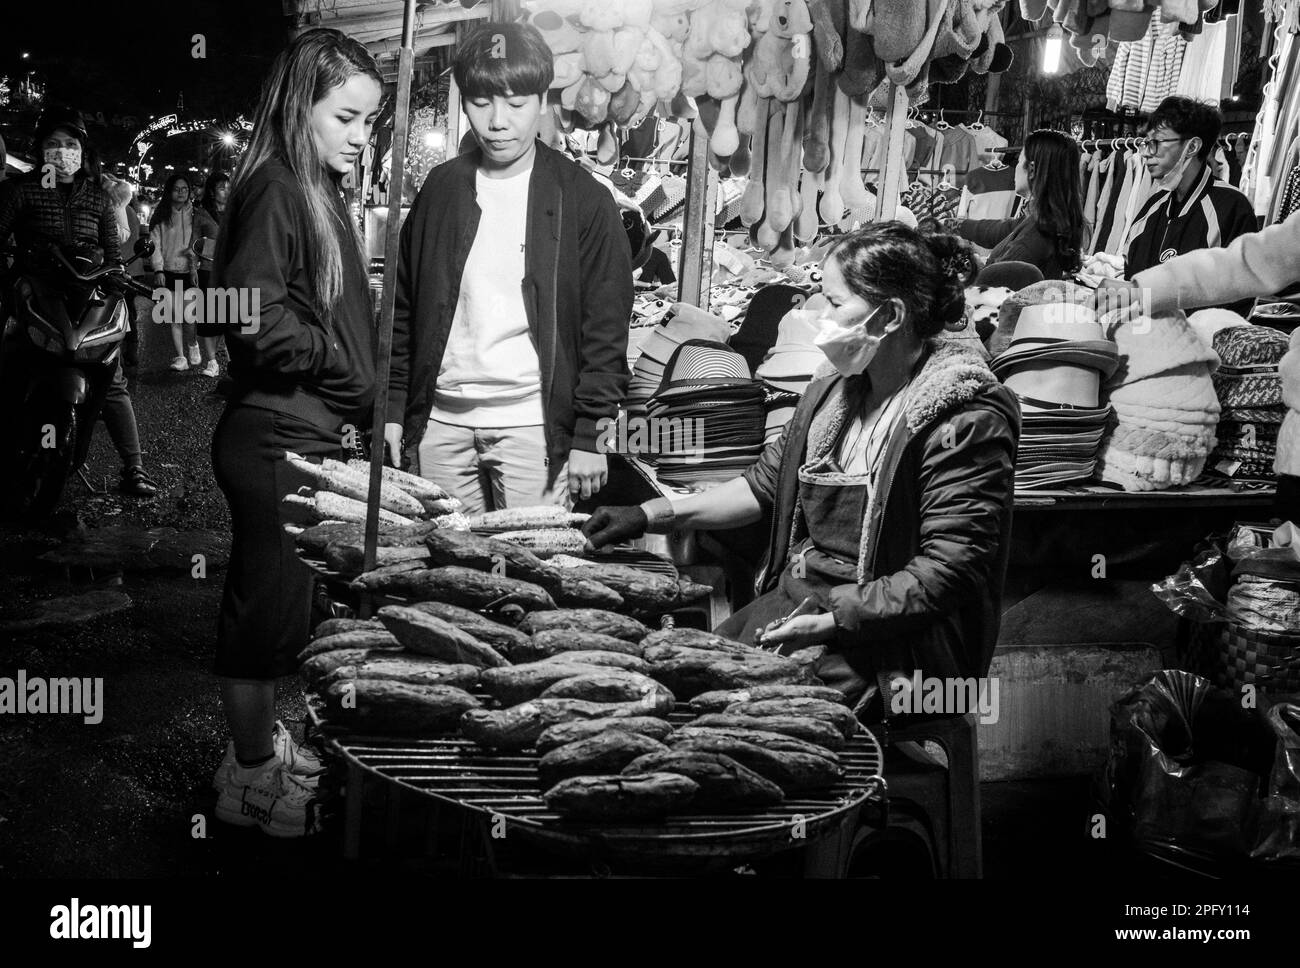 A young Vietnamese couple stop to buy grilled corn-on-the-cob at the bustling night market in Dalat, Vietnam. Stock Photo